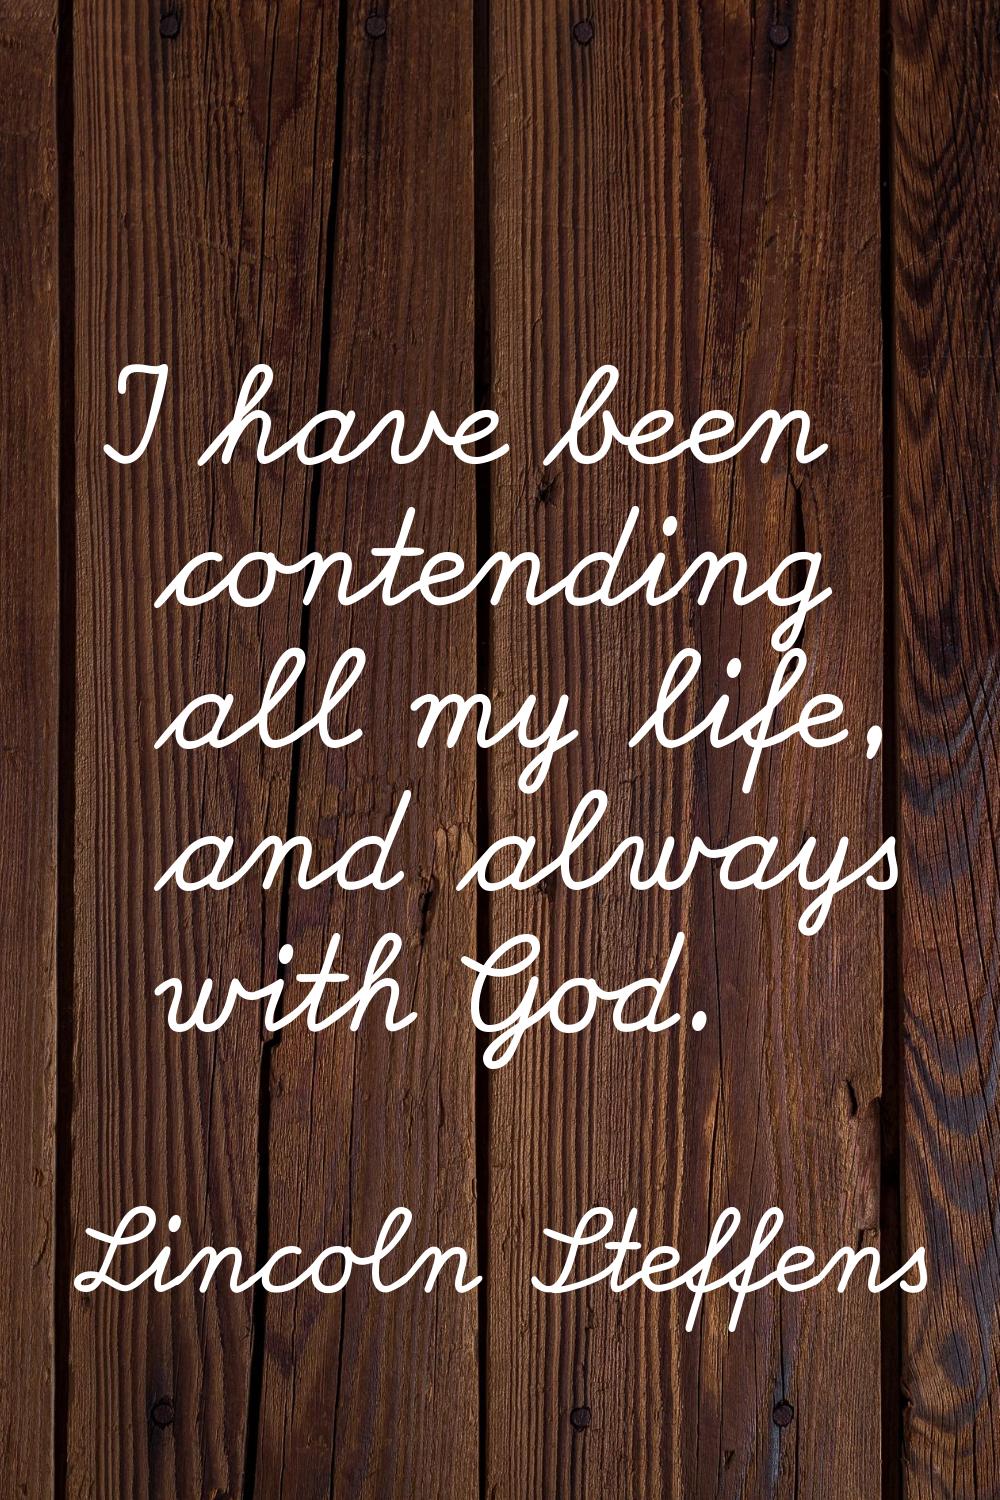 I have been contending all my life, and always with God.